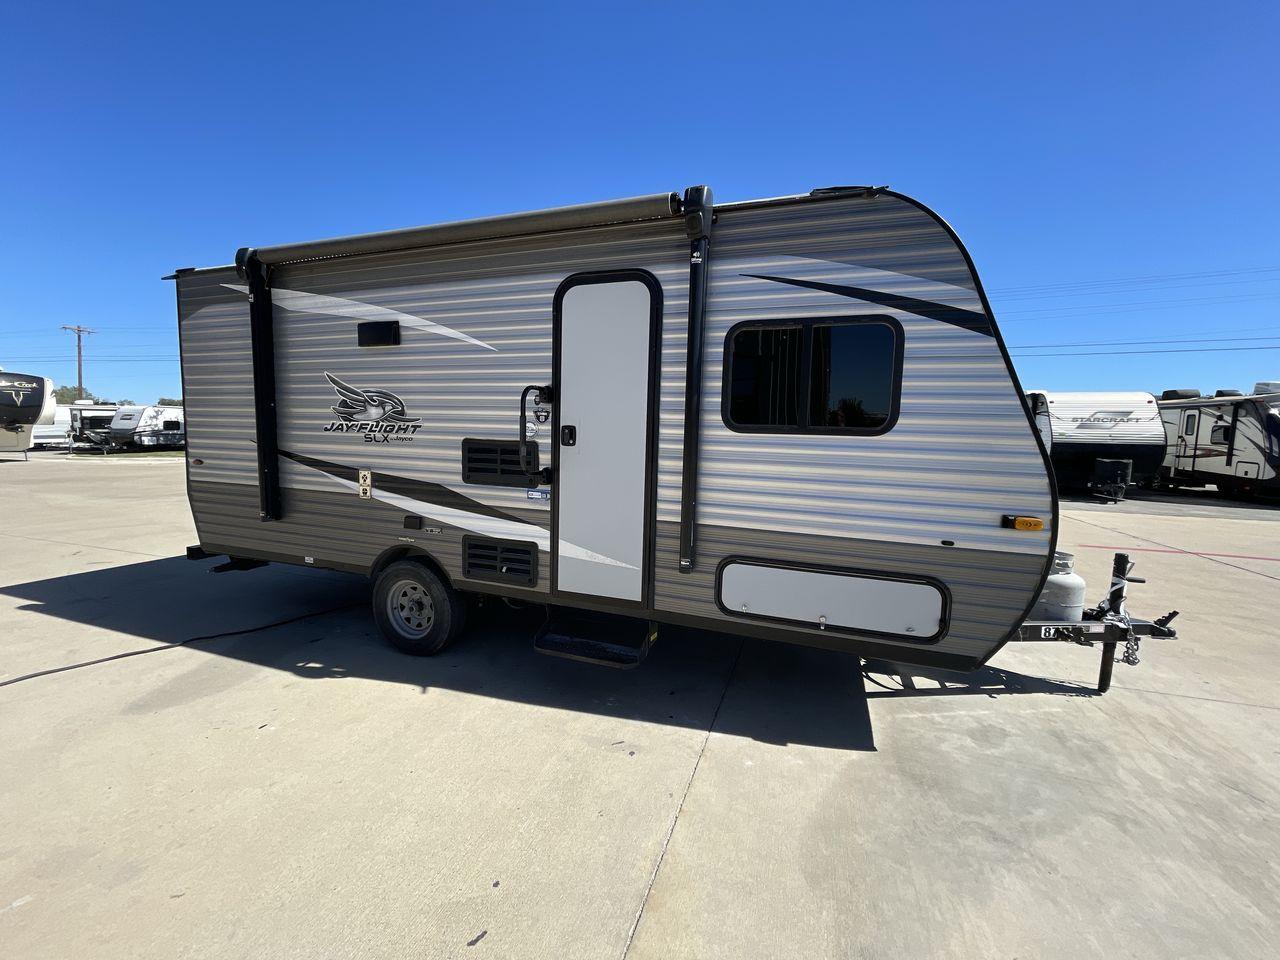 2021 JAYCO JAY FLIGHT SLX 174BH (1UJBJ0AJ1M1) , Length: 21.67 ft | Dry Weight: 3,075 lbs | GVWR: 3,950 lbs | Slides: 0 transmission, located at 4319 N Main Street, Cleburne, TX, 76033, (817) 221-0660, 32.435829, -97.384178 - Take the 2021 Jayco Jay Flight SLX 174BH travel trailer out on your camping adventures. This lightweight and small RV is ideal for people looking for an affordable and cozy way to enjoy the great outdoors. The dimensions of this unit are 21.67 ft in length, 7.08 ft in width, and 9.17 ft in height. I - Photo #22